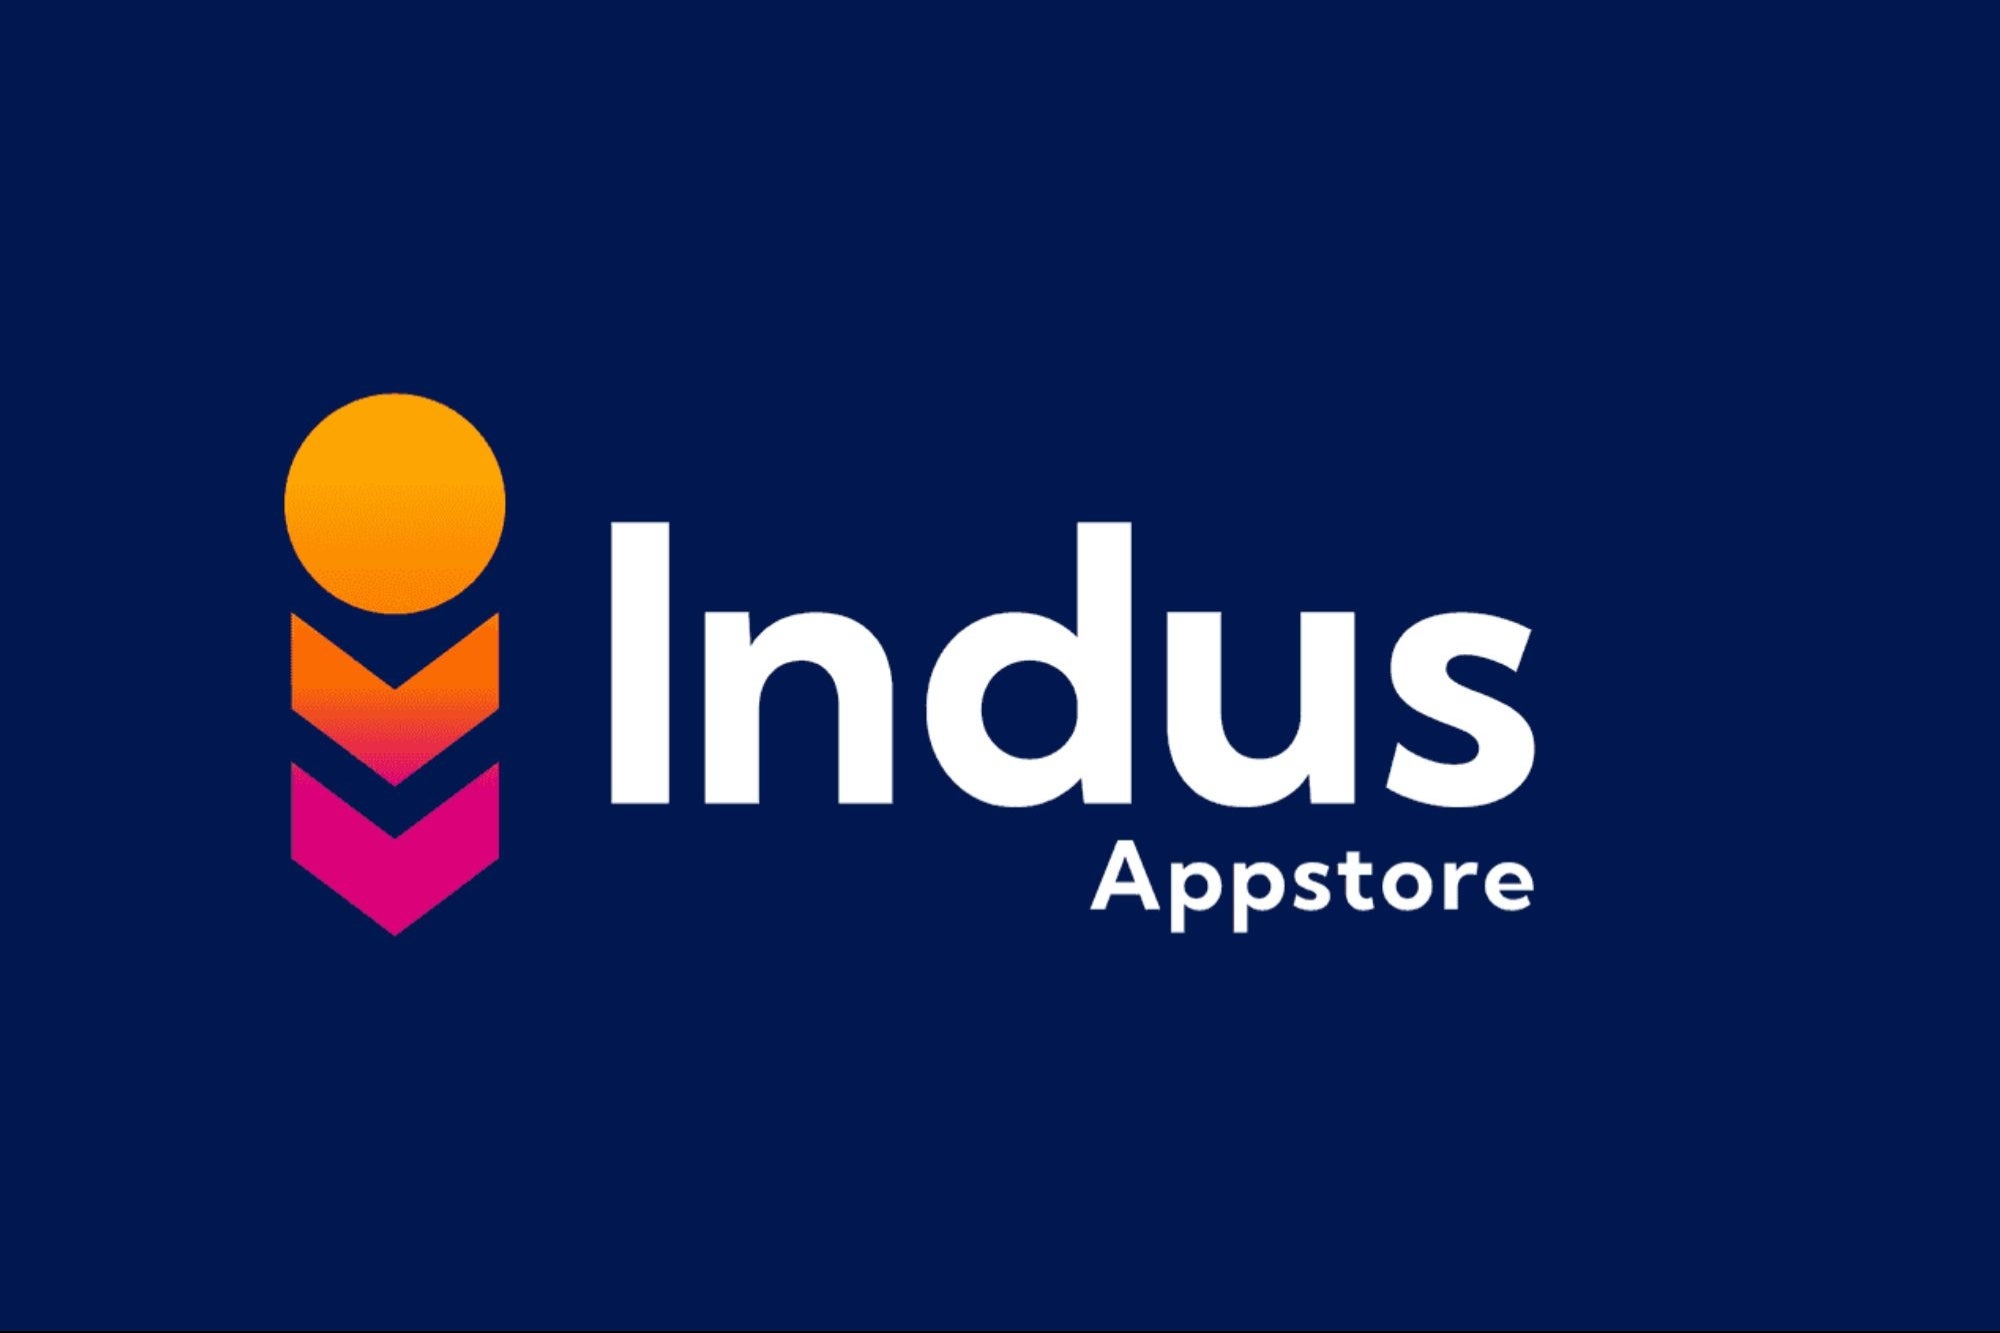 PhonePe launches its own app store : Indus Appstore